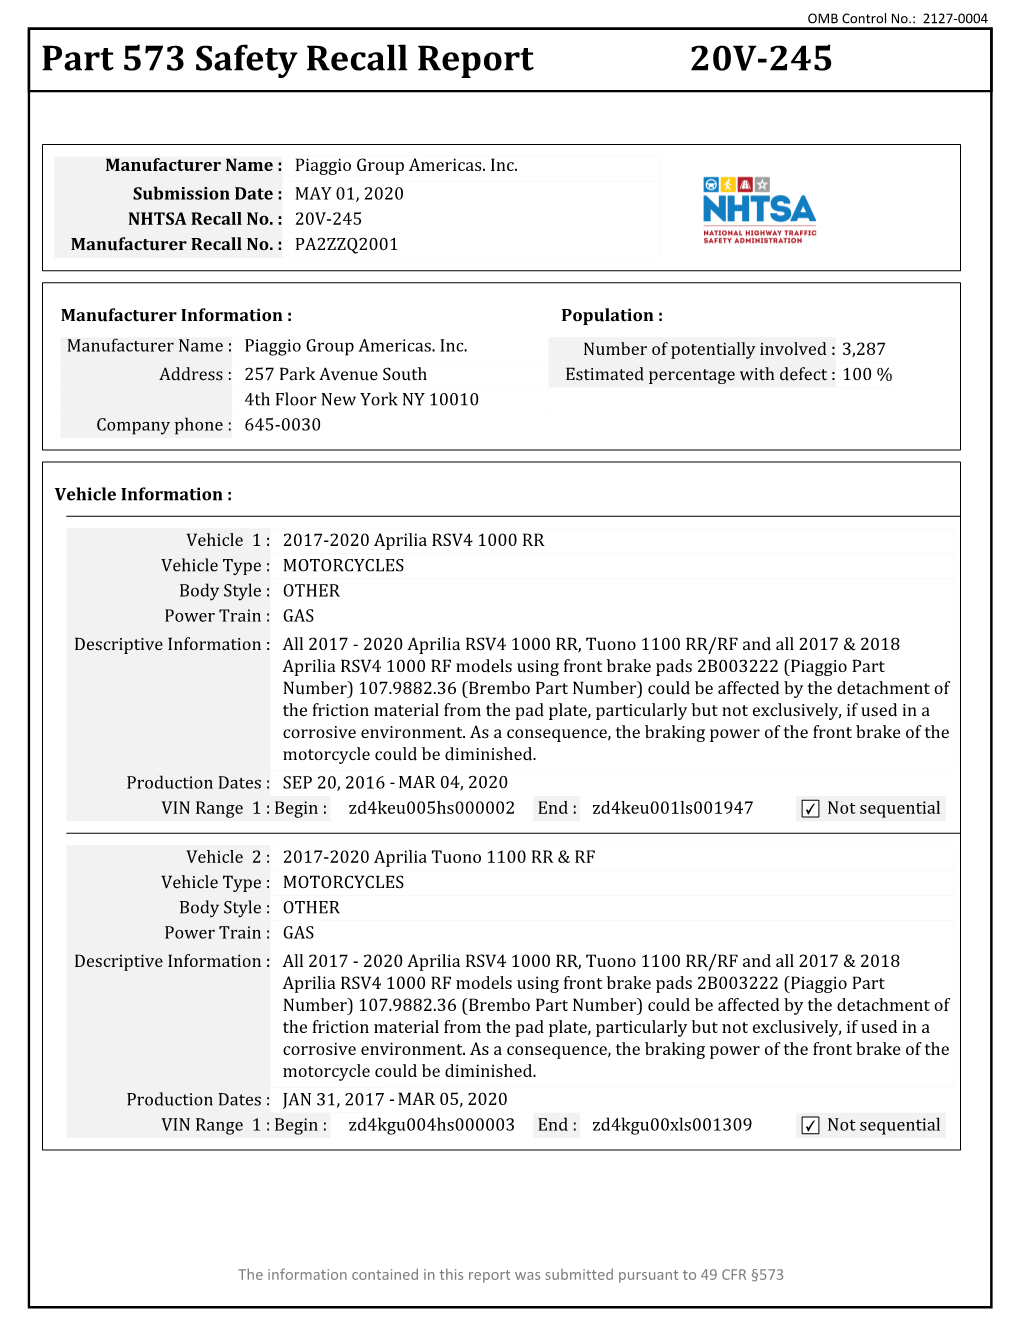 Part 573 Safety Recall Report 20V-245